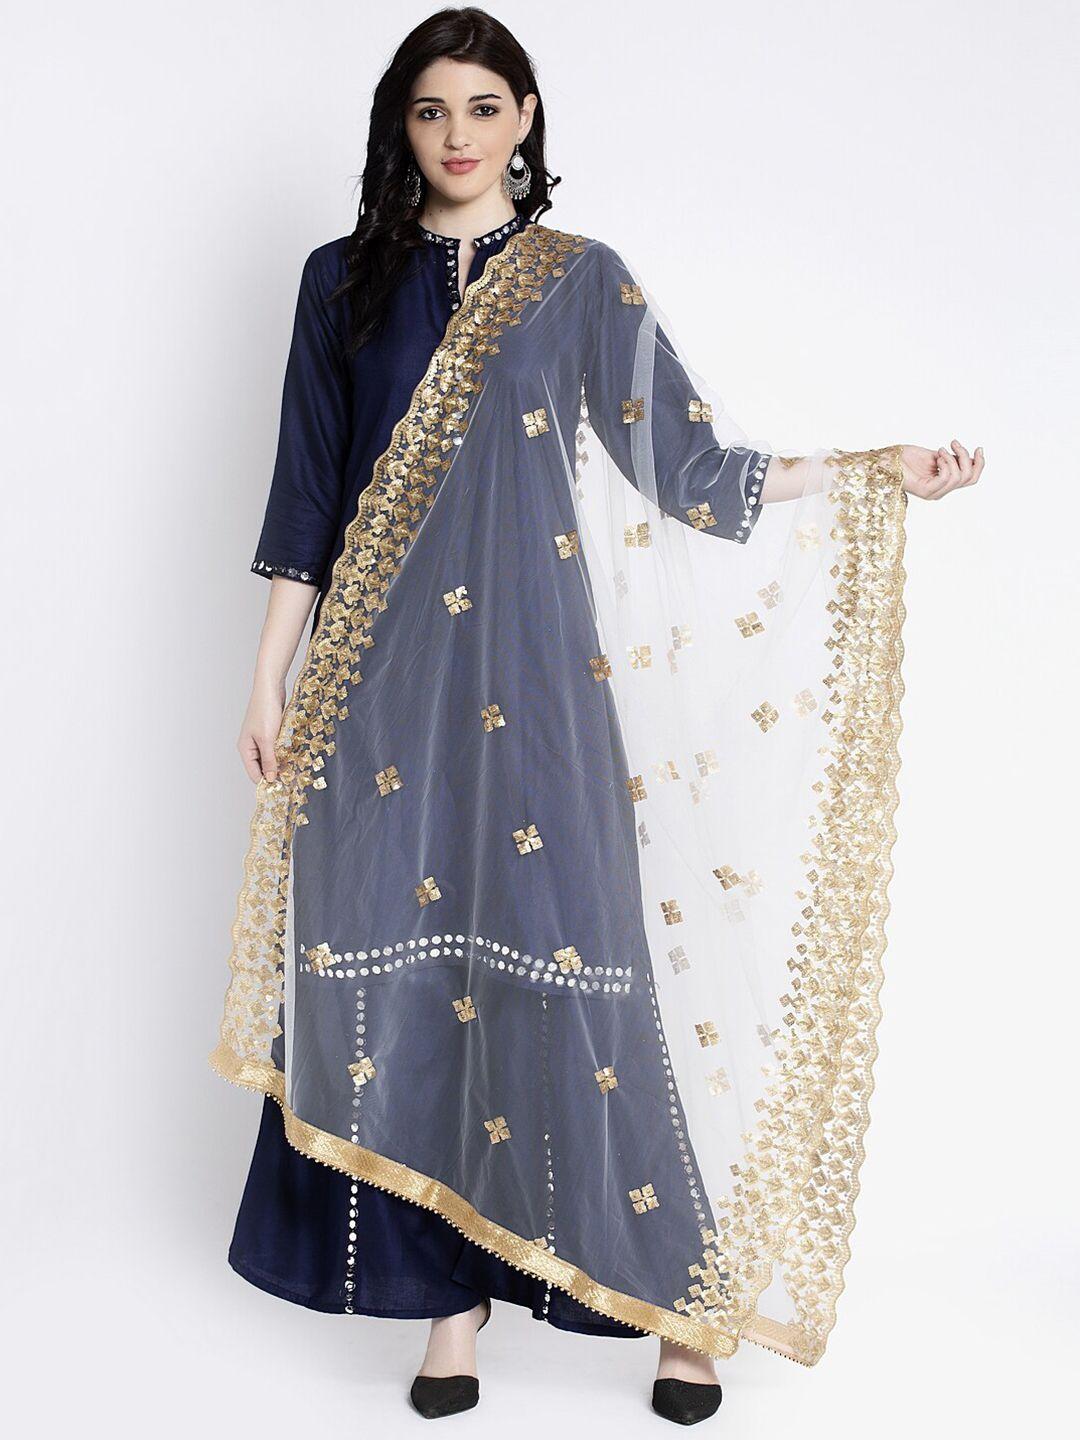 clora creation white & gold-toned ethnic motifs embroidered dupatta with sequinned